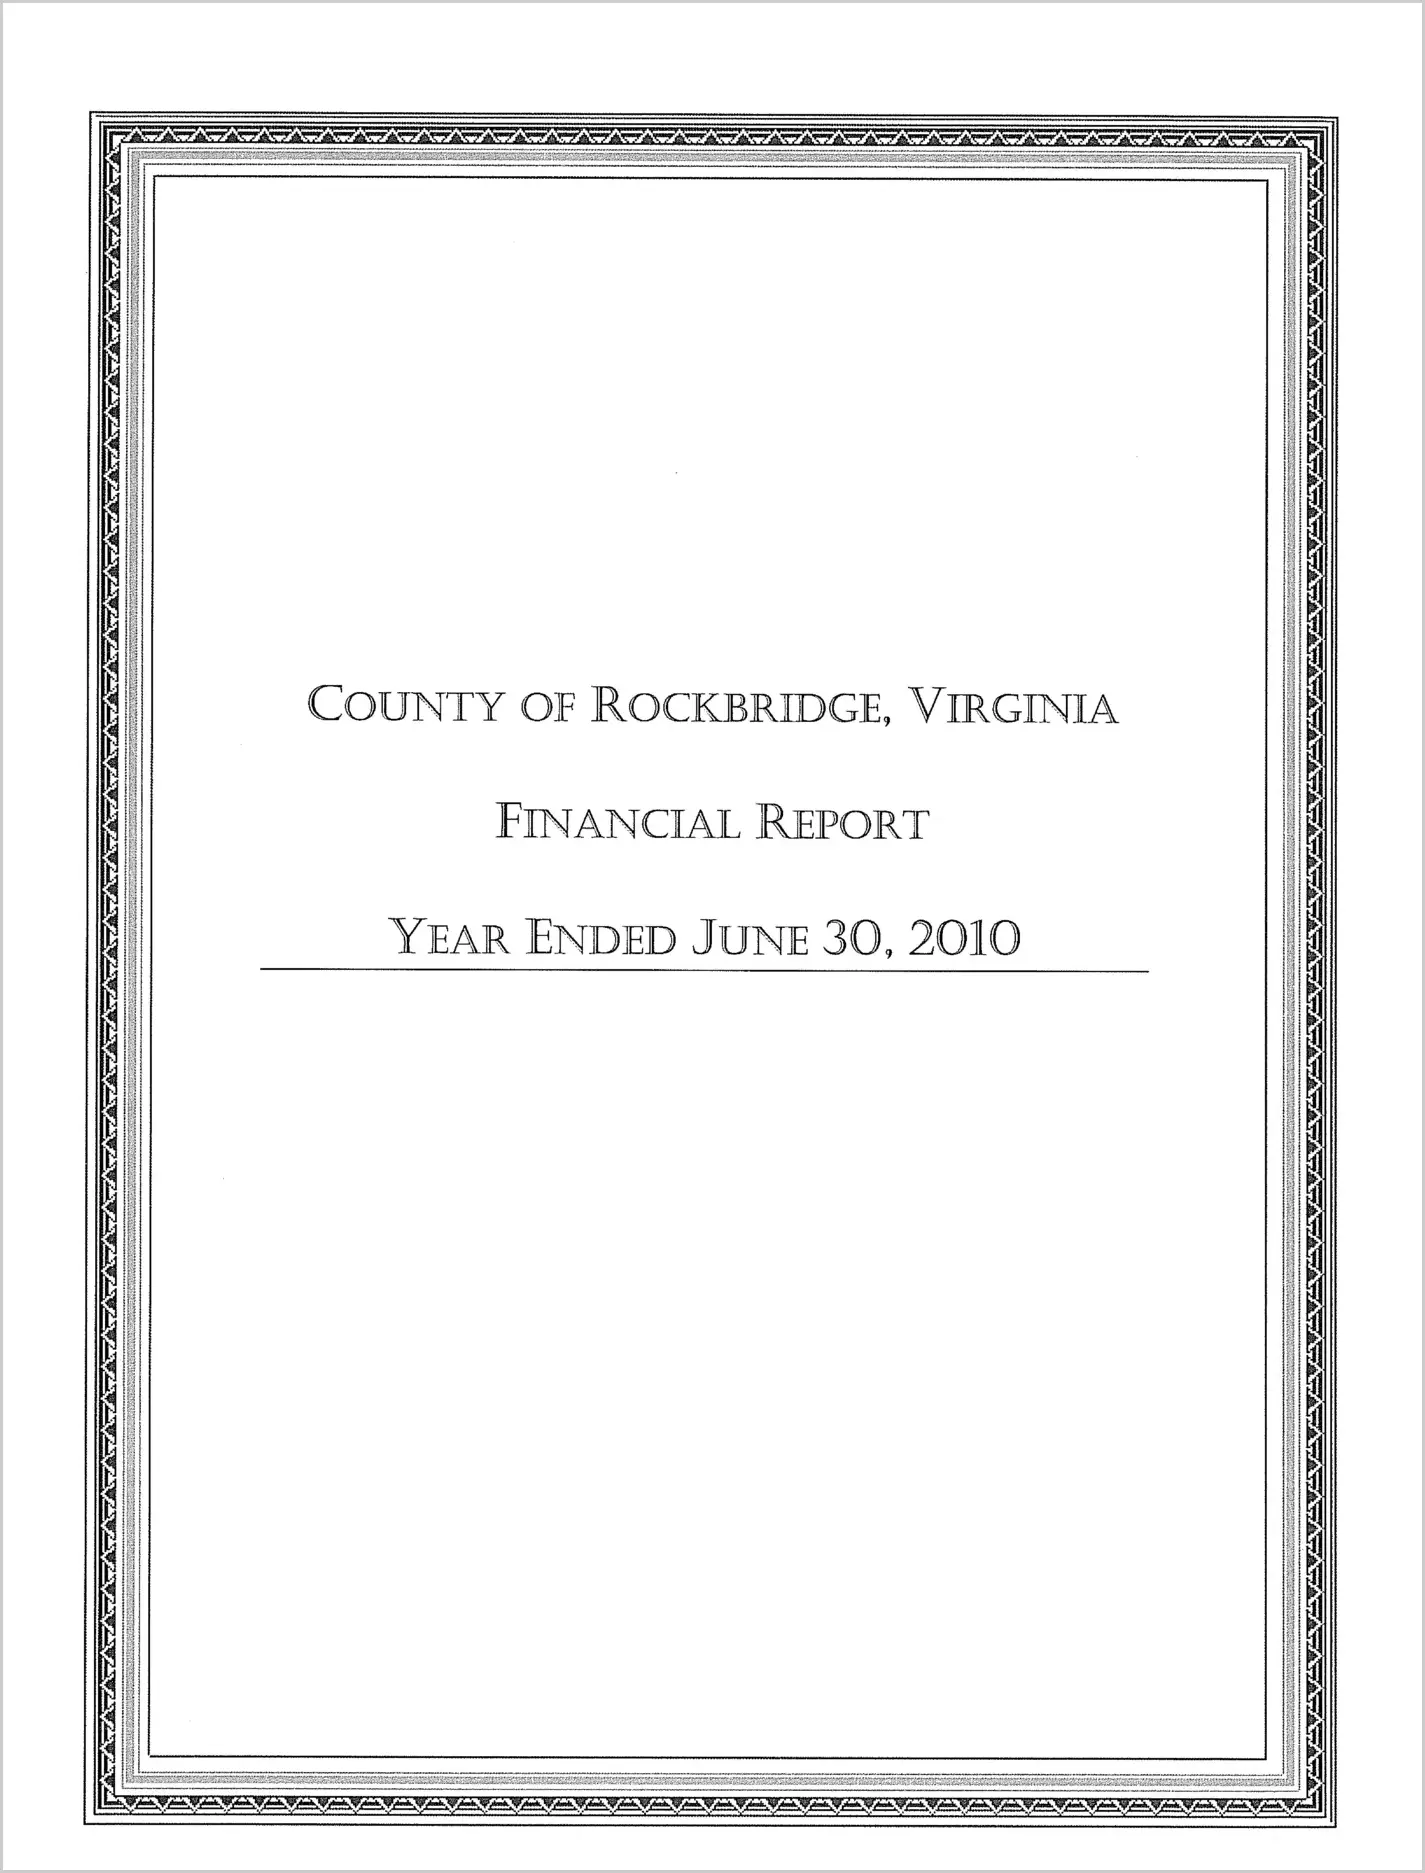 2010 Annual Financial Report for County of Rockbridge